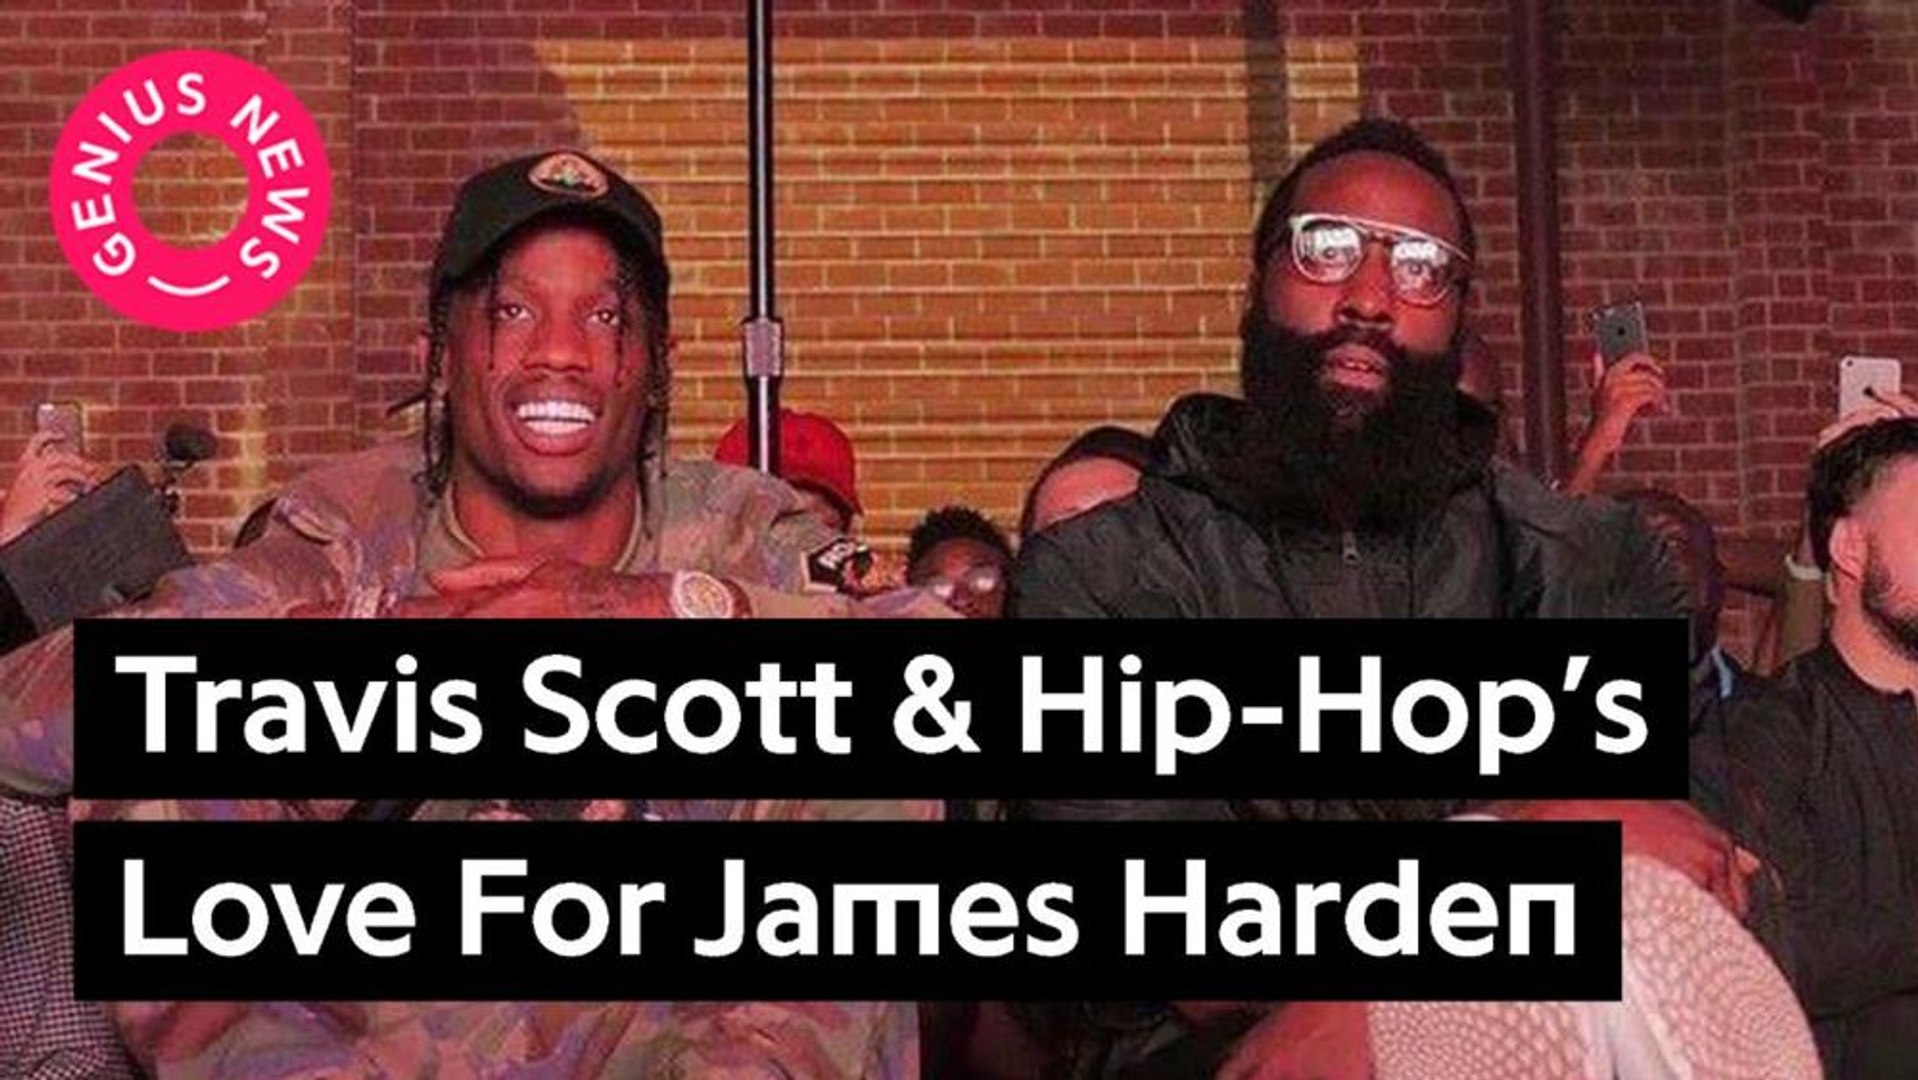 Travis Scott Shows James Harden and Houston Love in “Way Back” Video